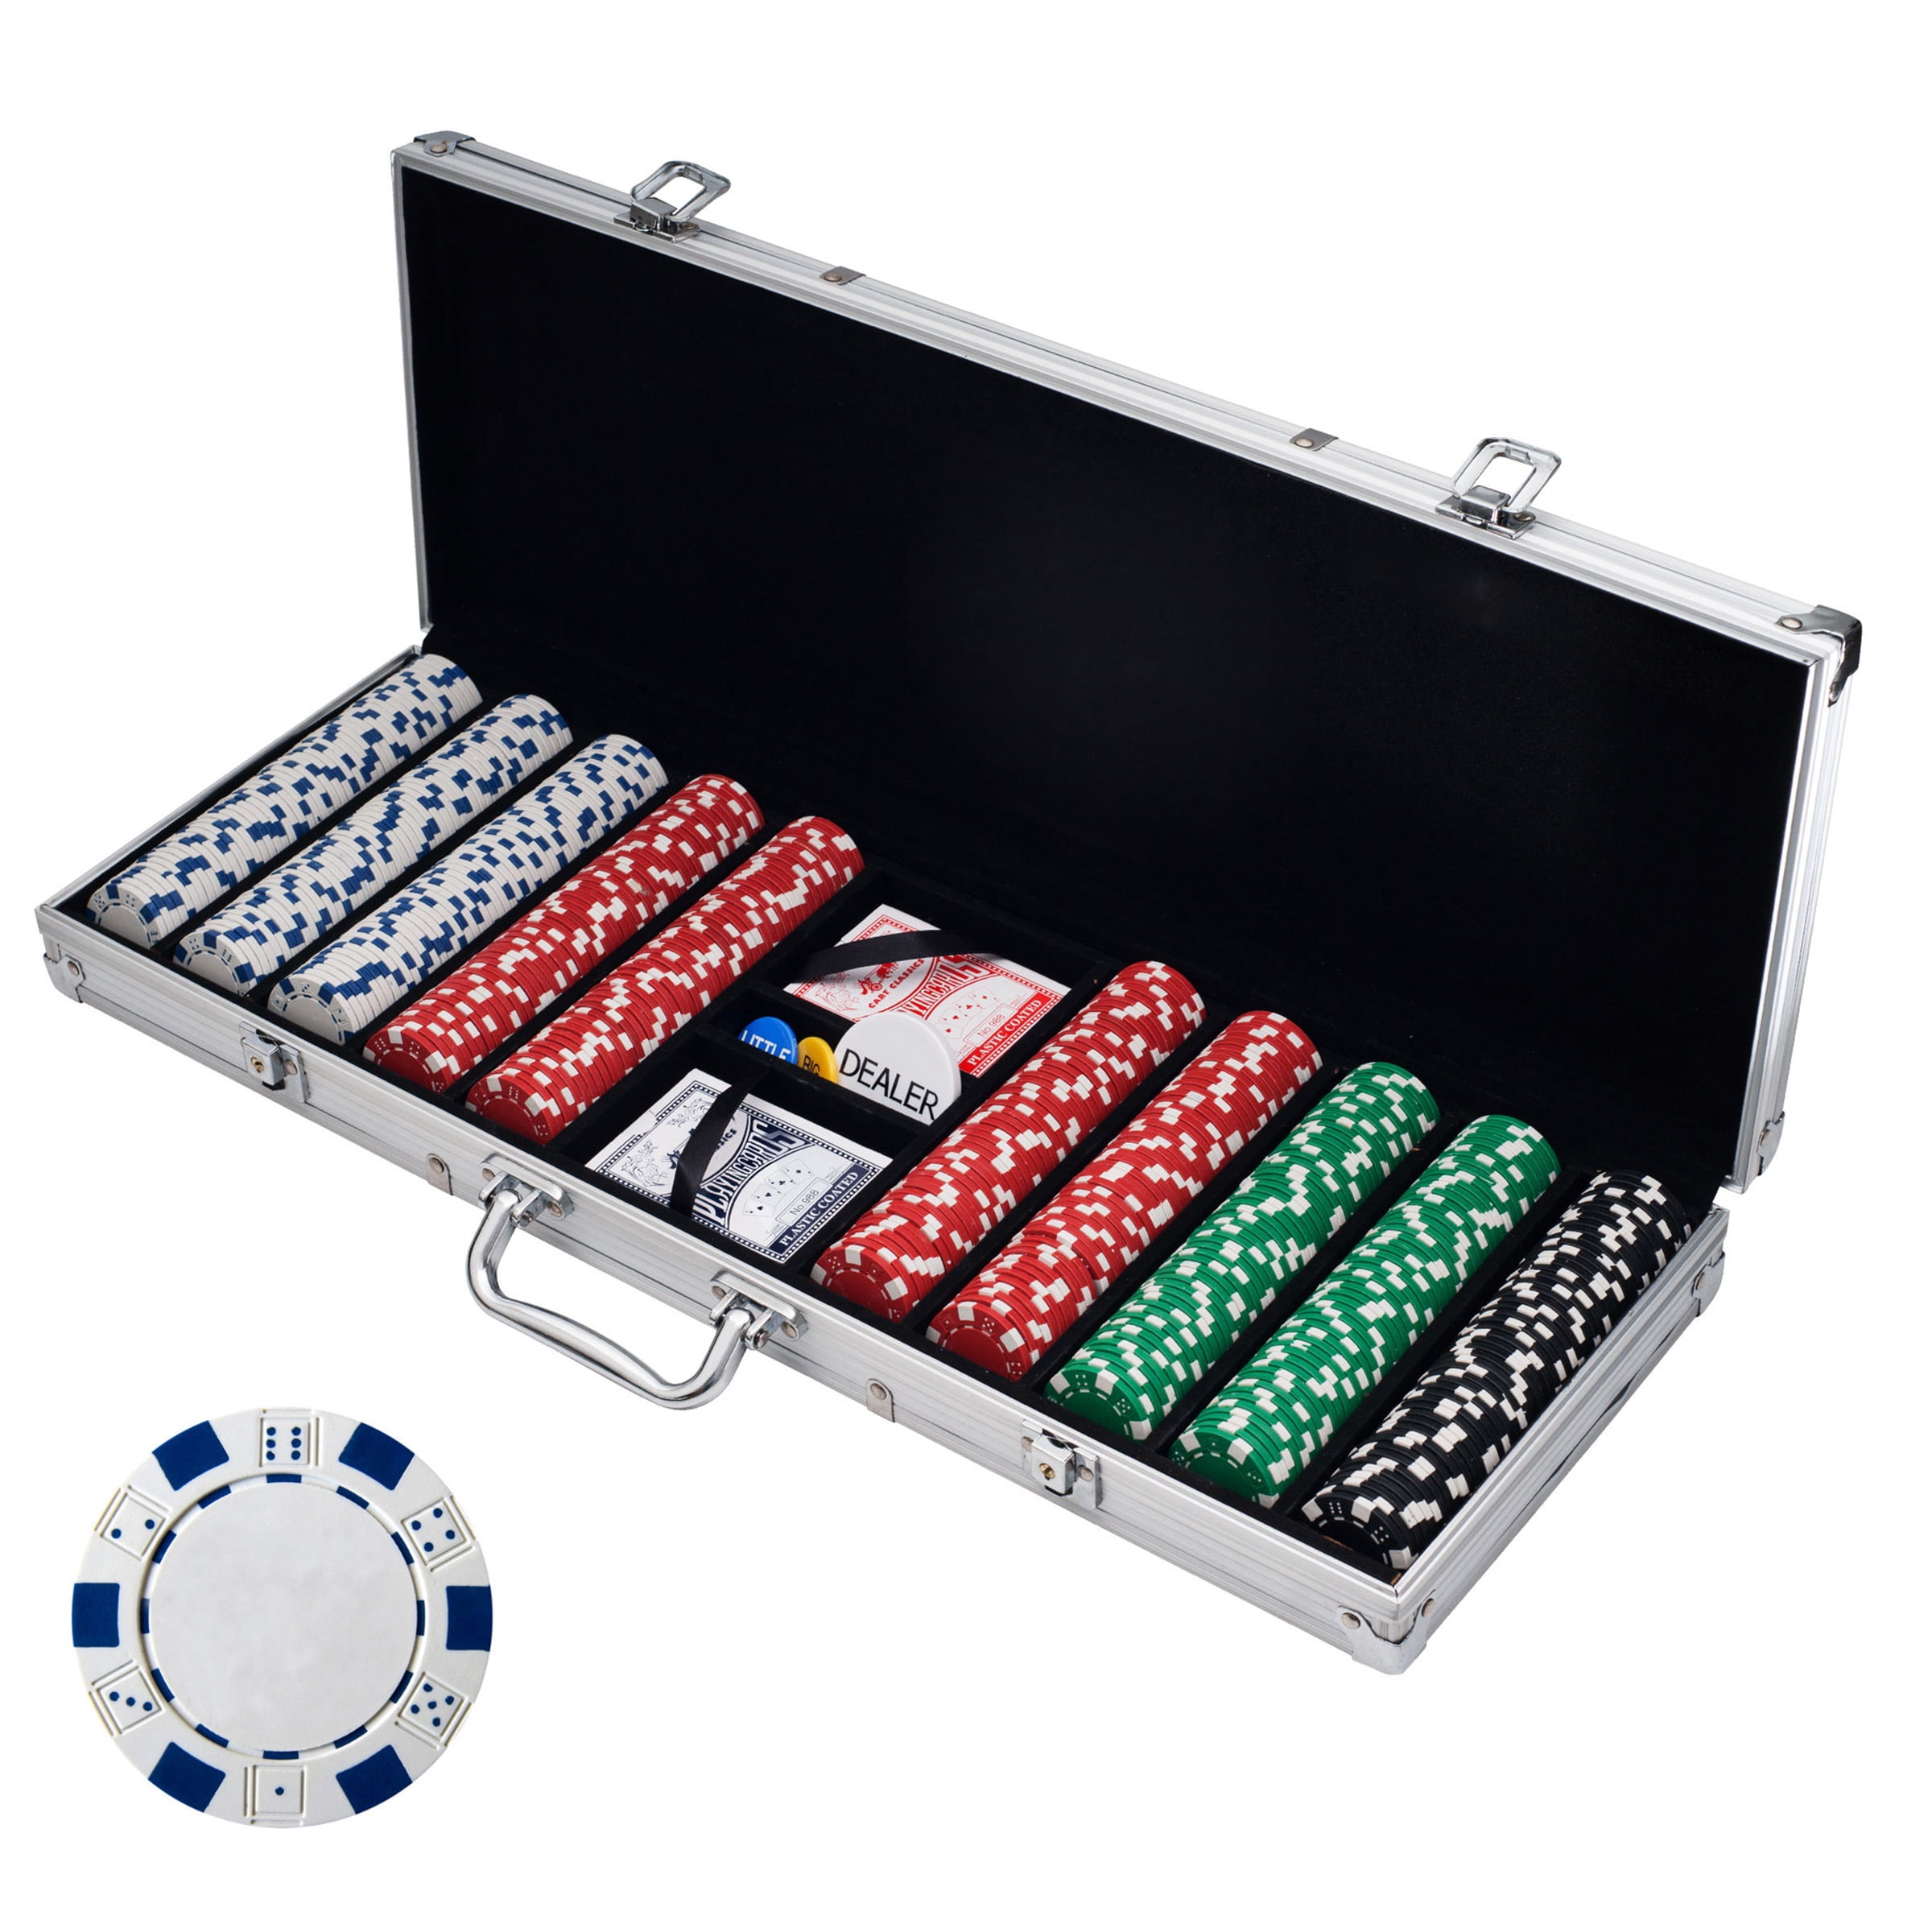 WPT 500 CHIP POKER CHIP SET IN RACK WIth DICE AND CARDS 